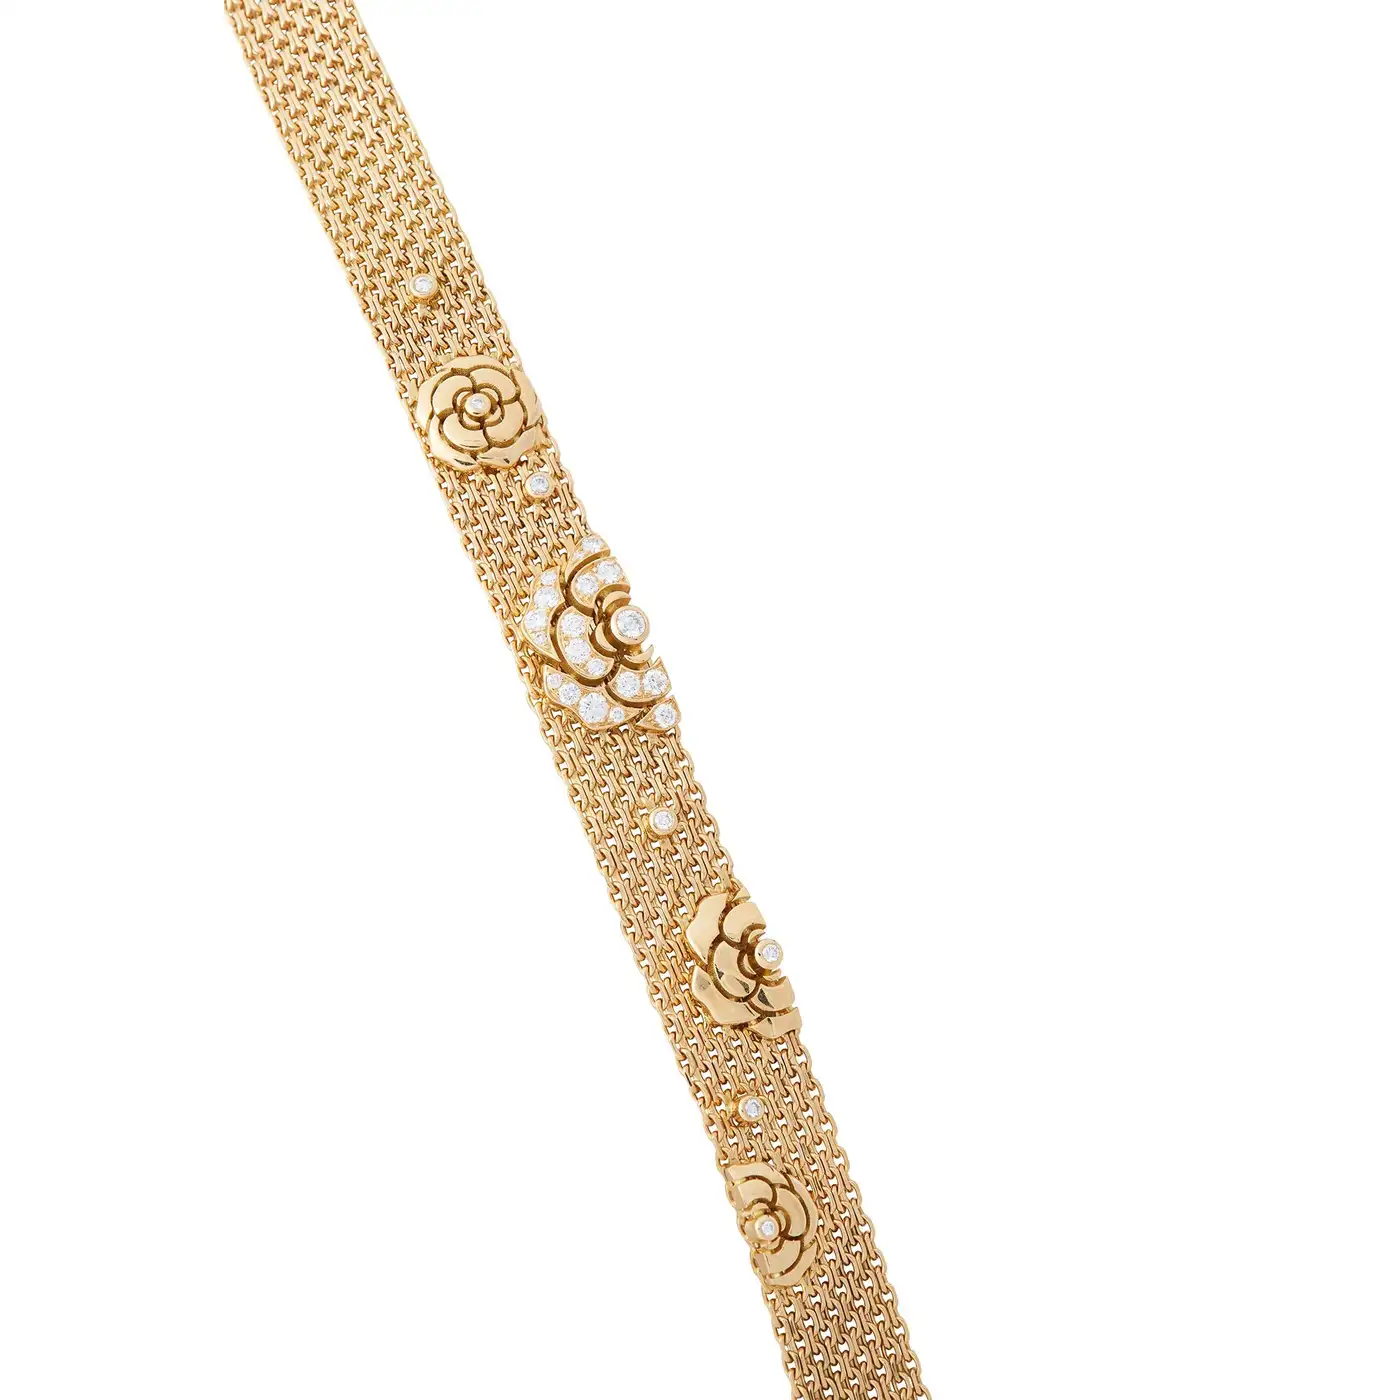 Chanel-Gold-and-Diamond-Camellia-Multi-Strand-Flapper-Necklace-5.webp